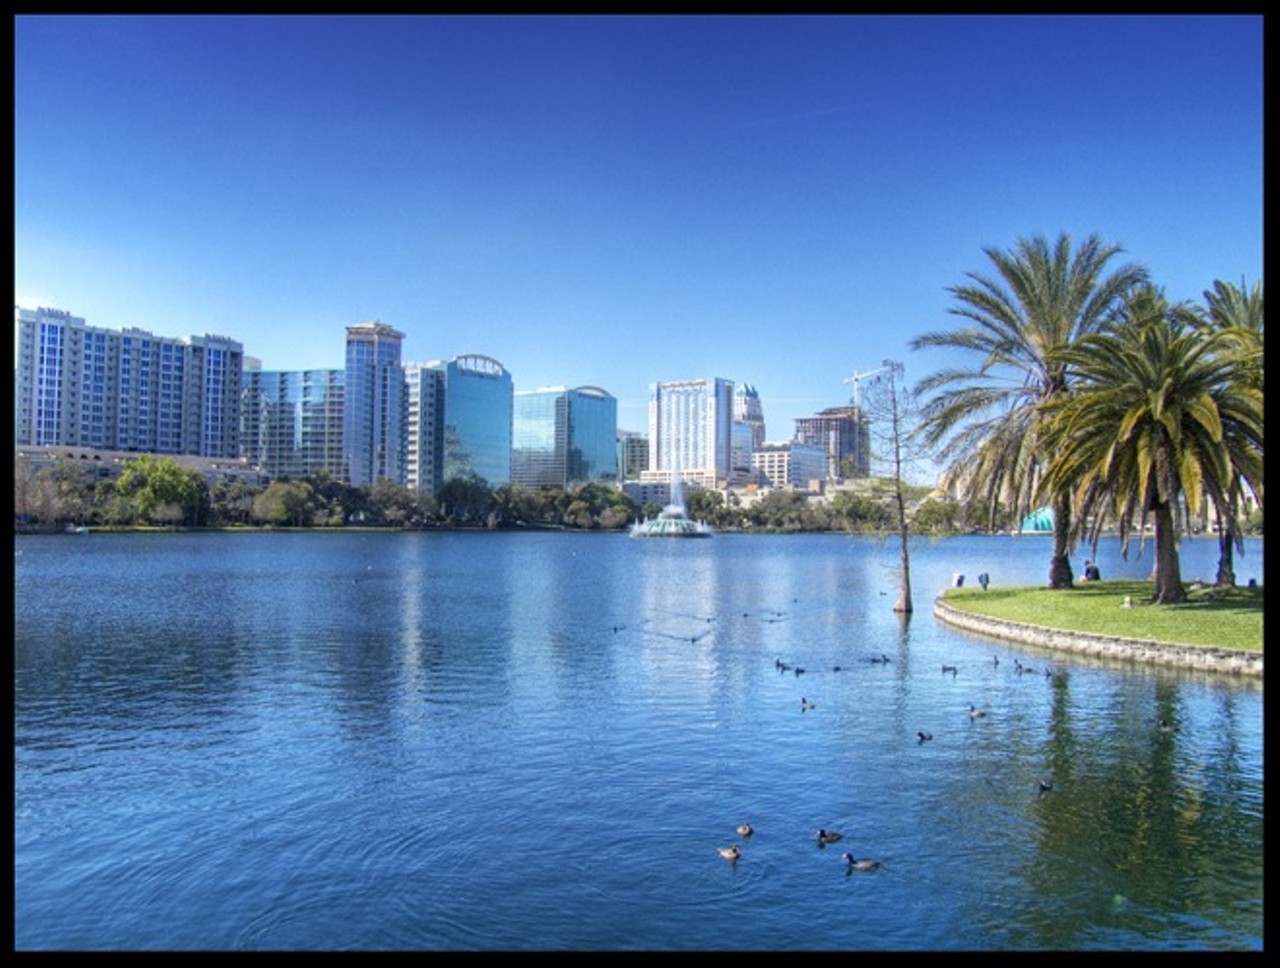 Lake Eola is actually a giant sinkhole. It covers an area of 23 acres, and its deepest point is 23 feet.
Photo via Flickr